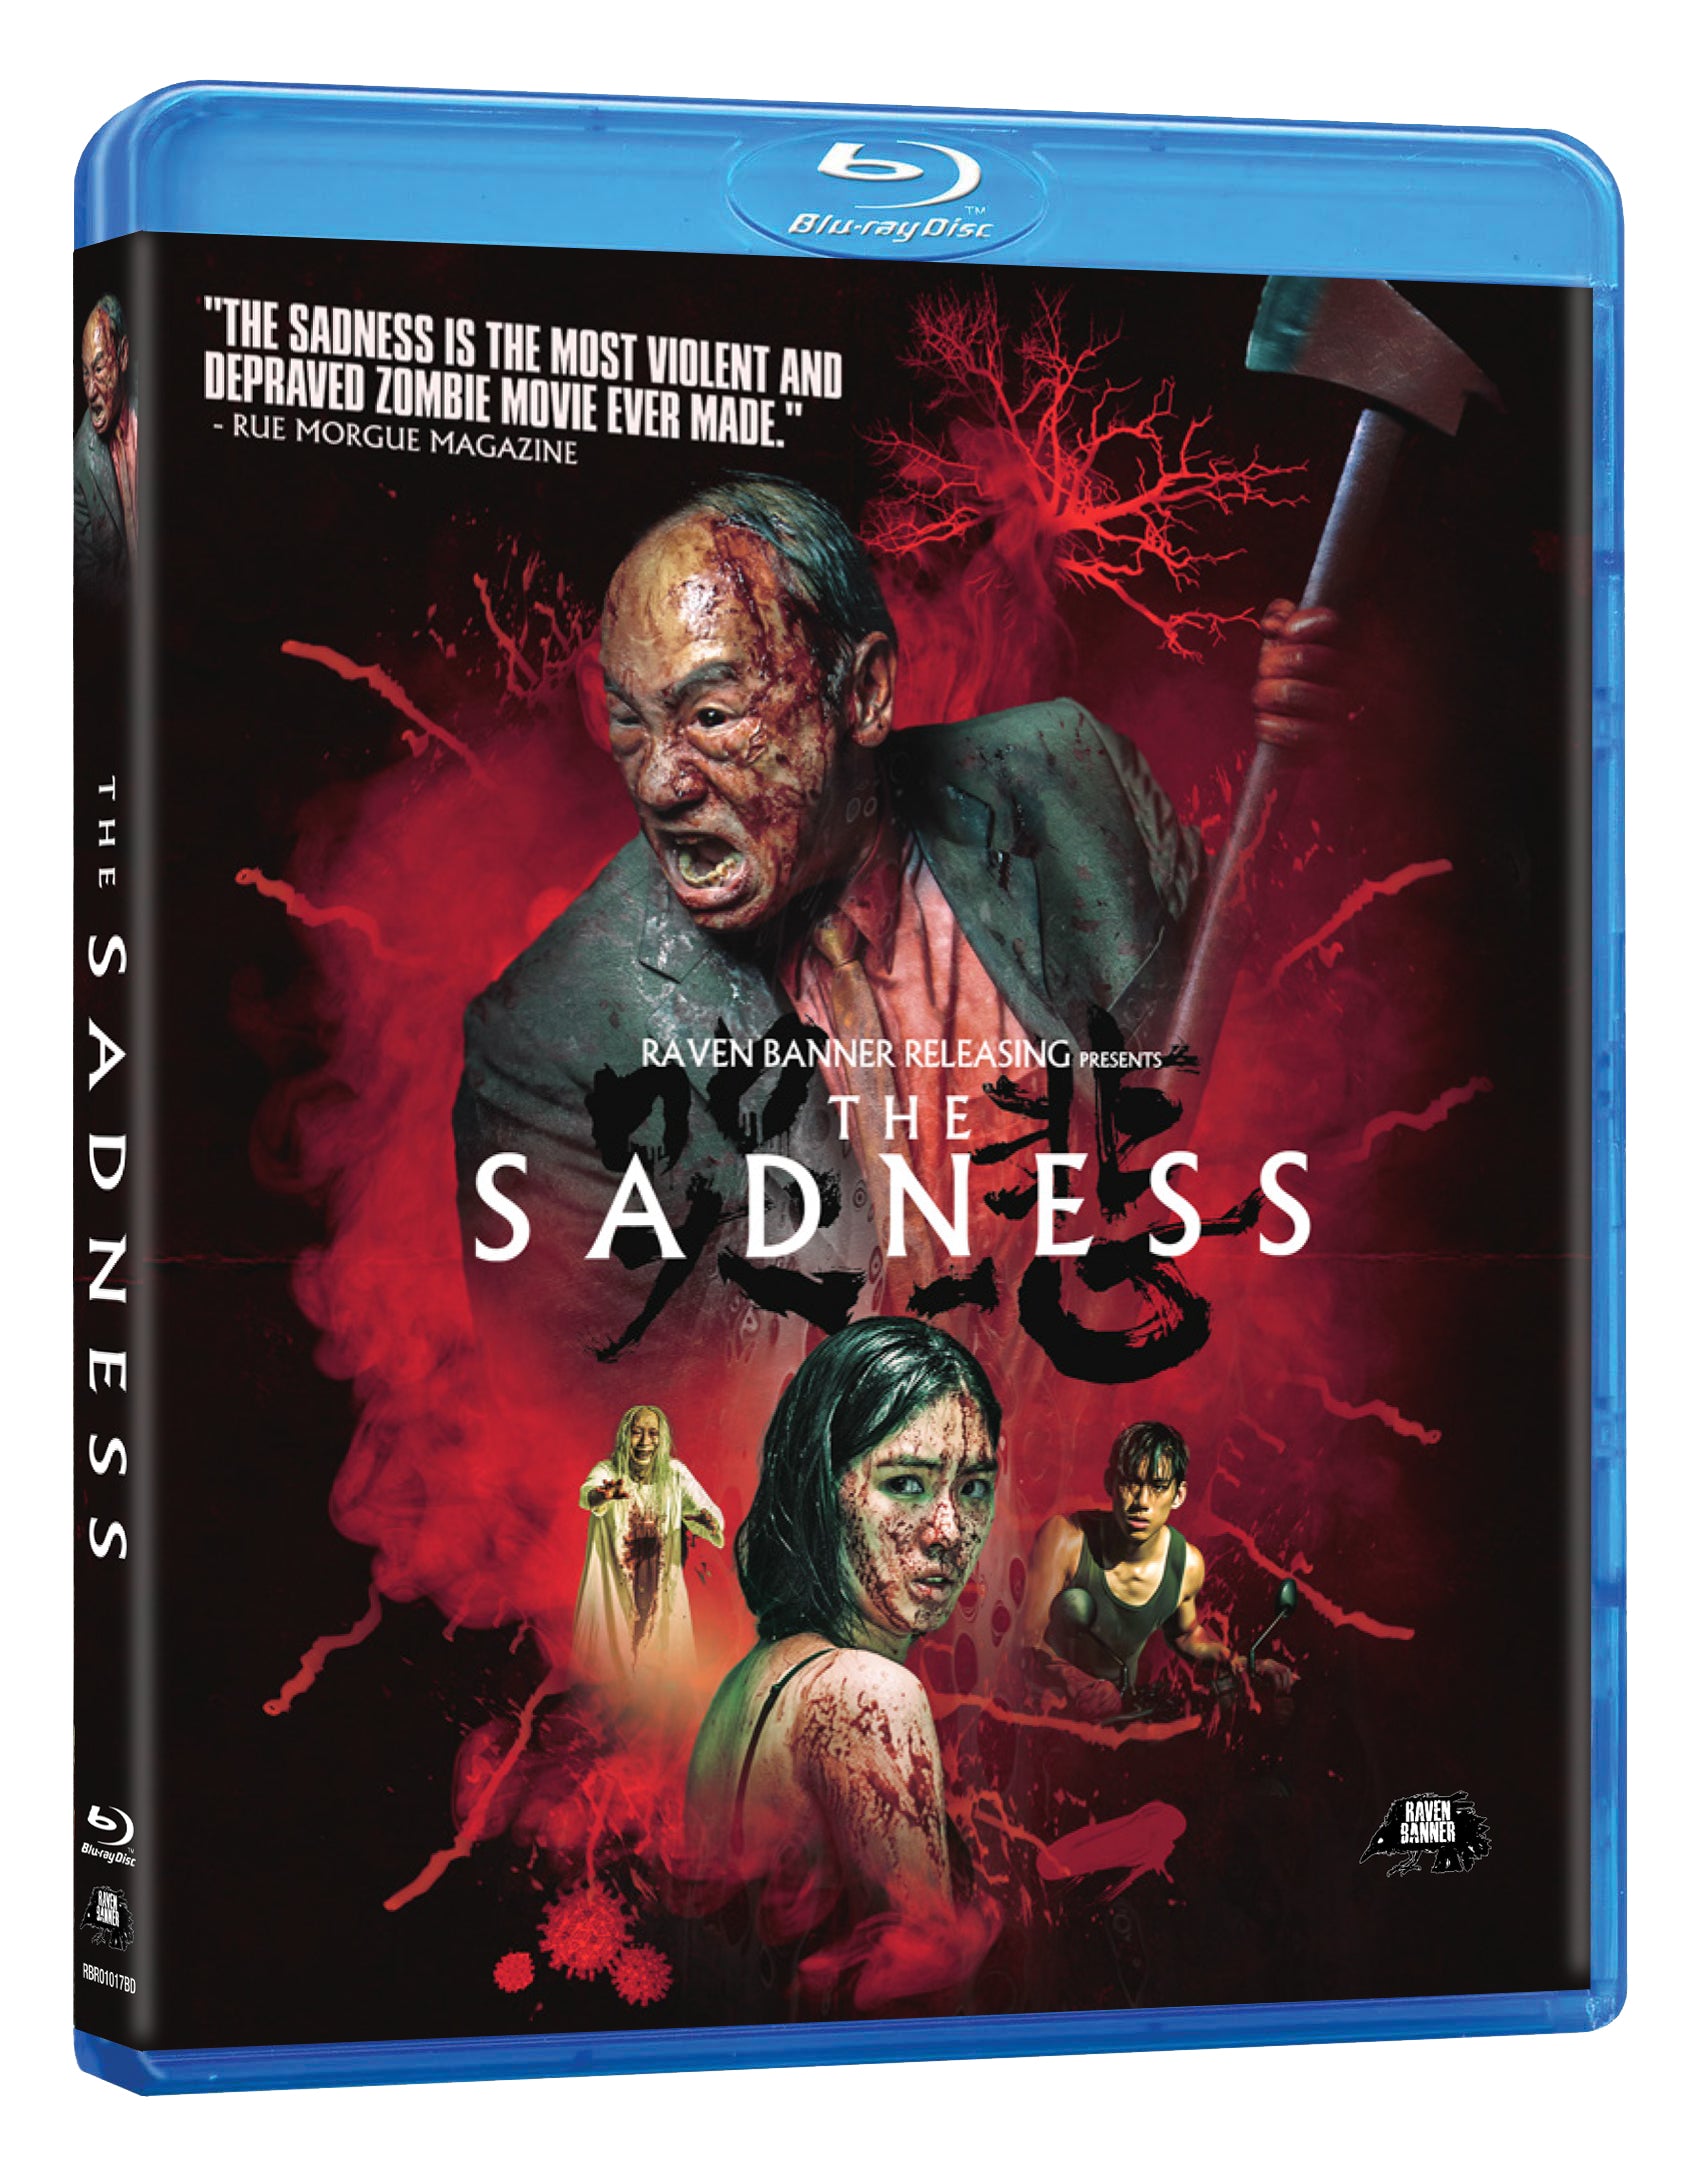 THE SADNESS - SPECIAL DIRECTOR'S EDITION BLU-RAY